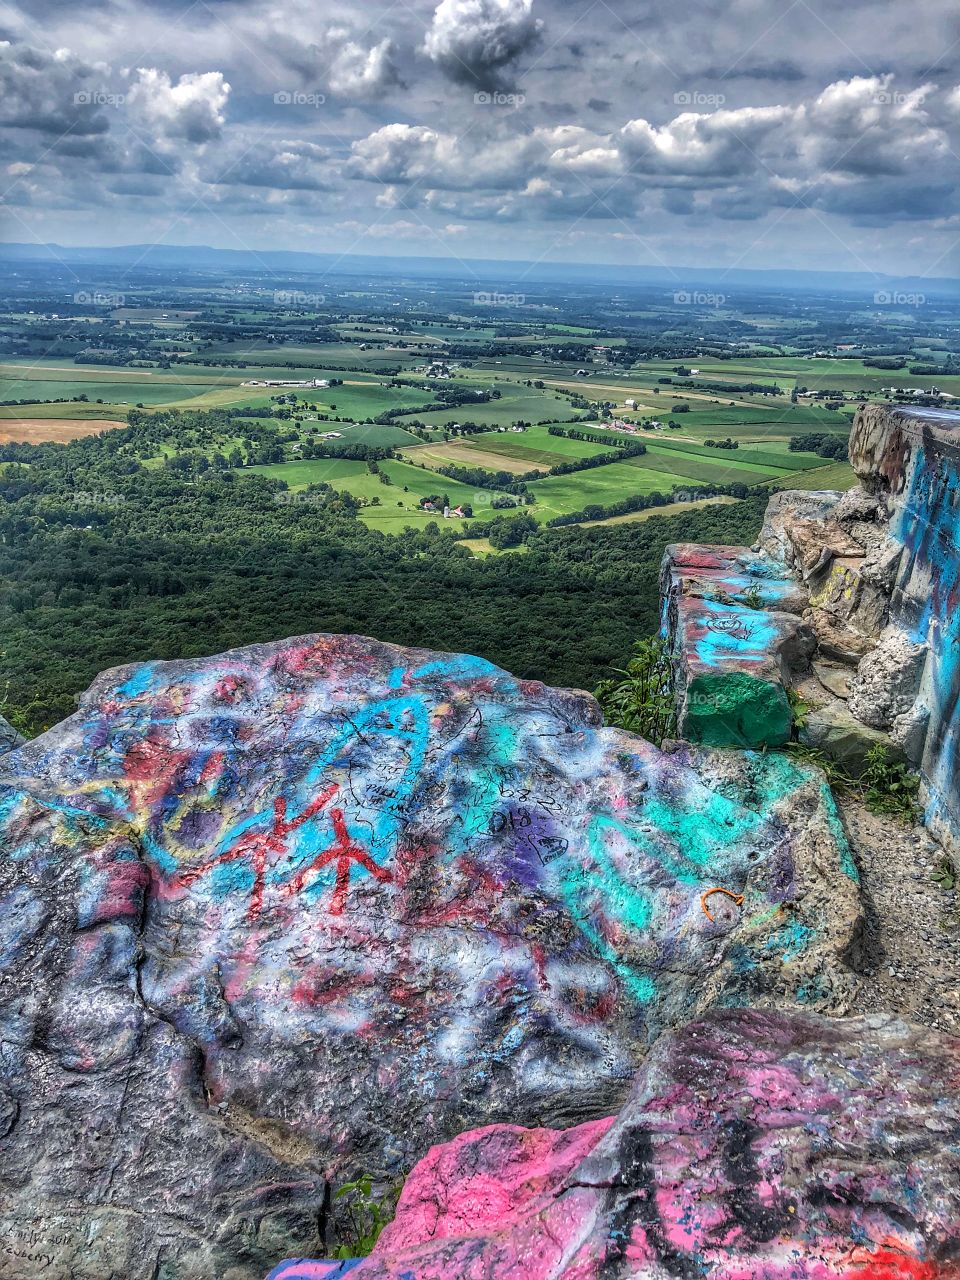 High rock lookout Maryland park painted graffiti boulders rocks view from up top 